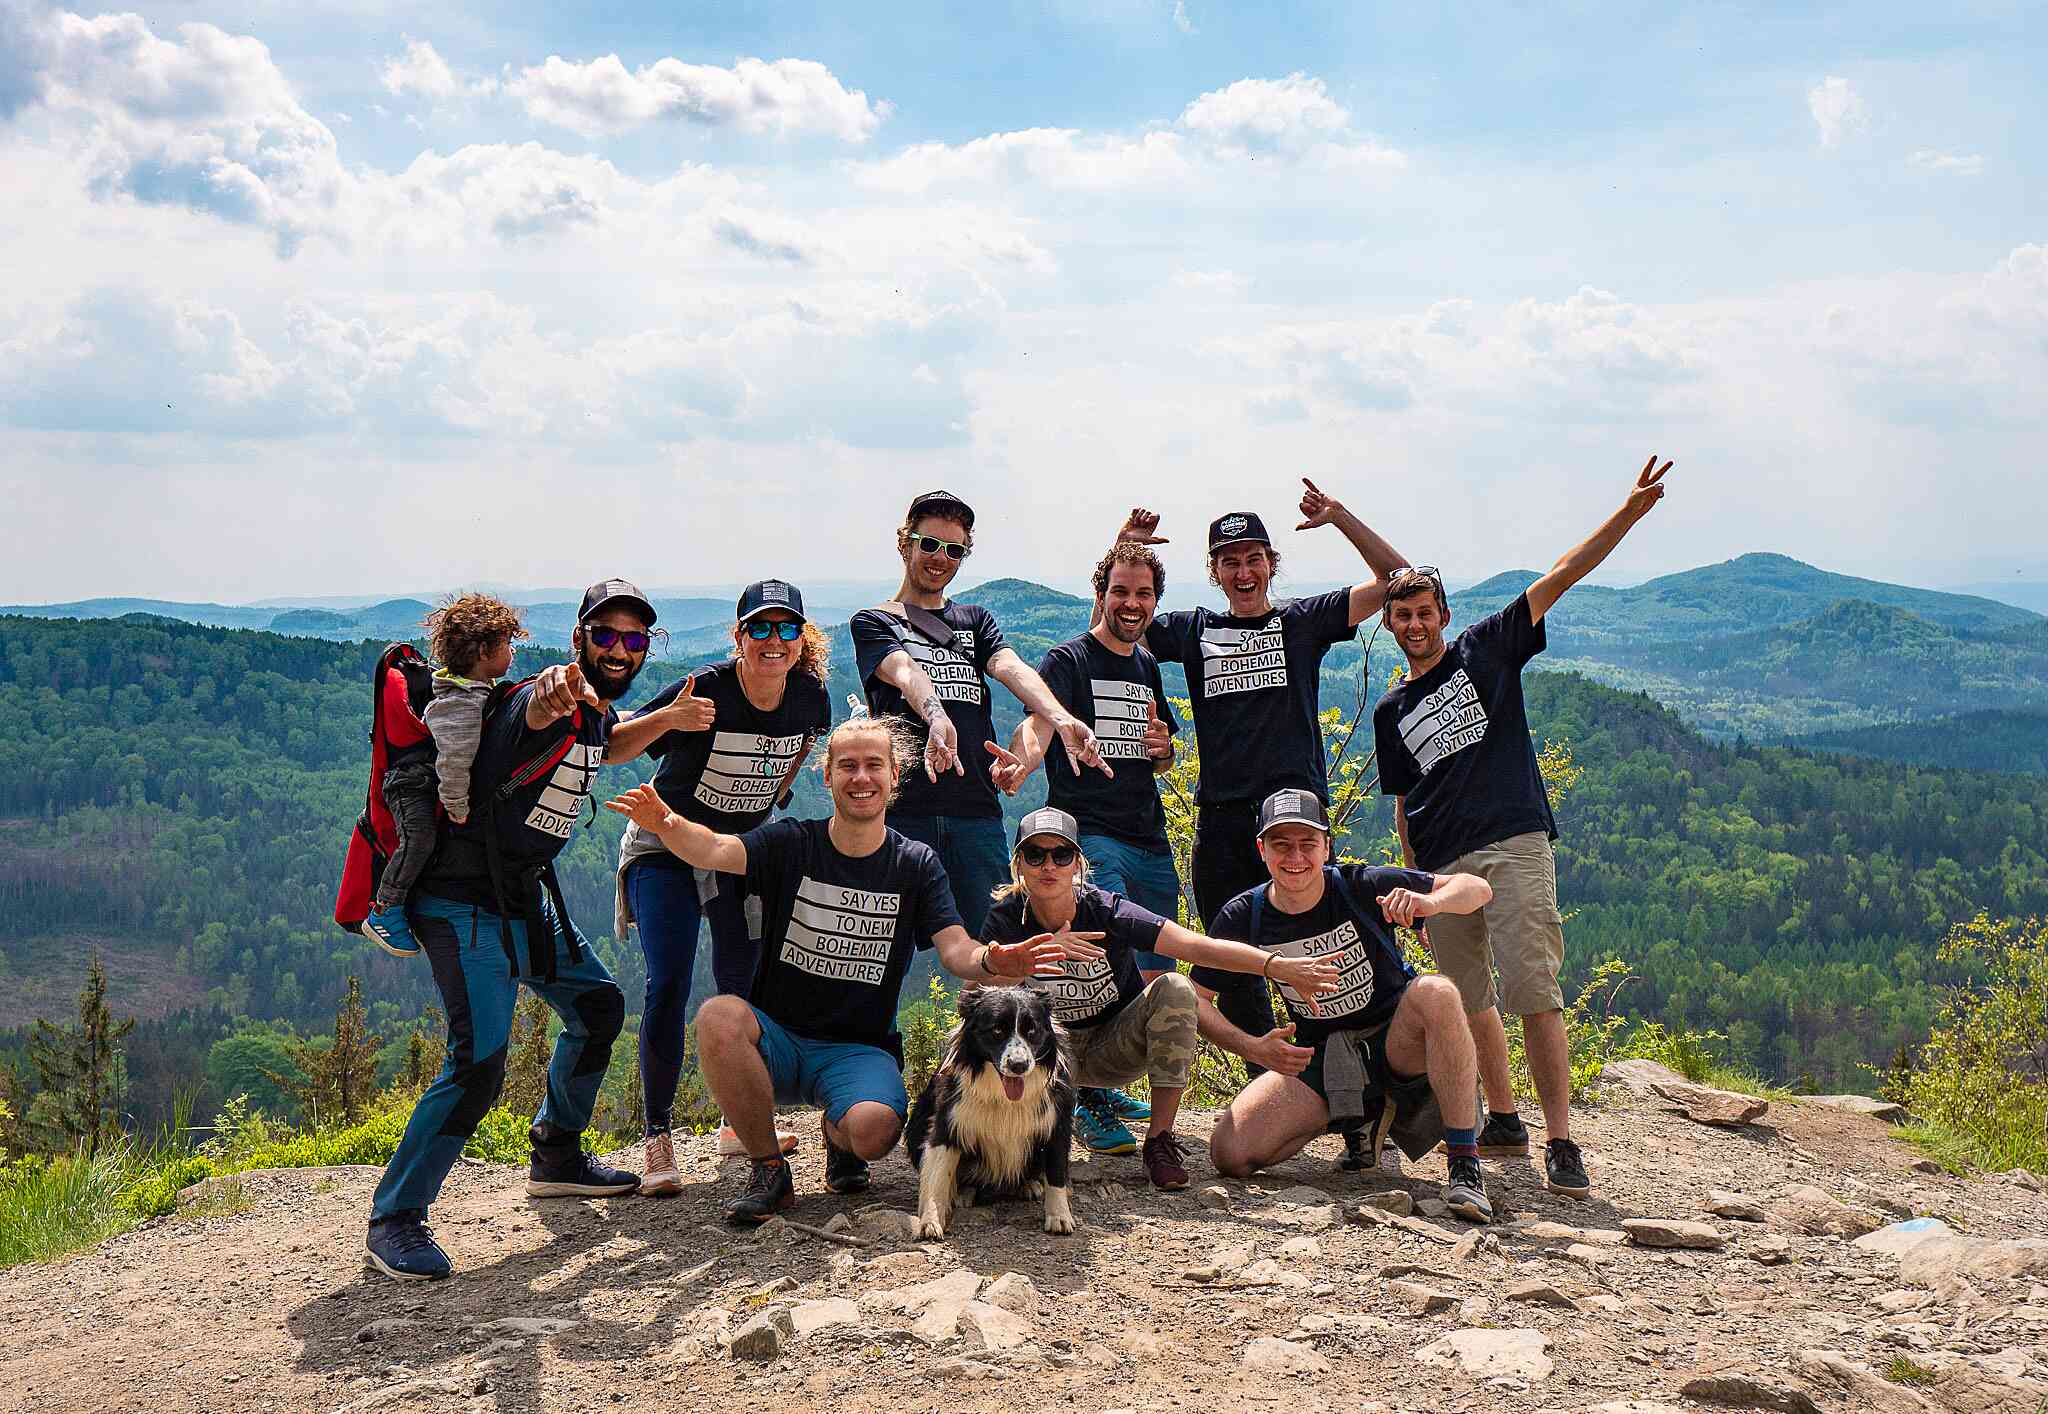 Best Guides in Bohemian Switzerland, Bohemia adventures guides